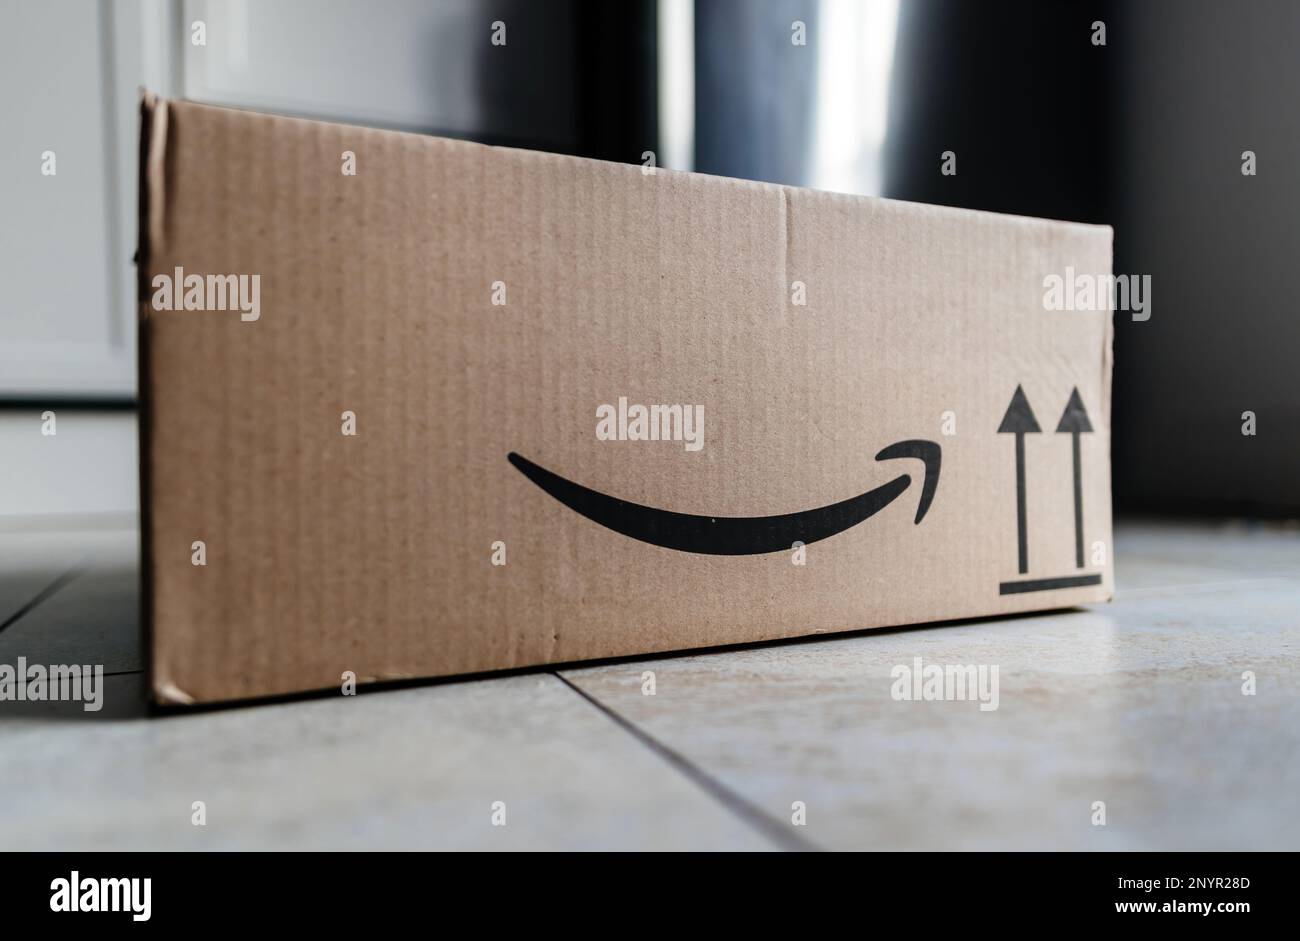 Paris, France - Mar 1, 2023: Amazon Prime cardboard parcel on the floor in the kitchen right before the unboxing unpacking Stock Photo